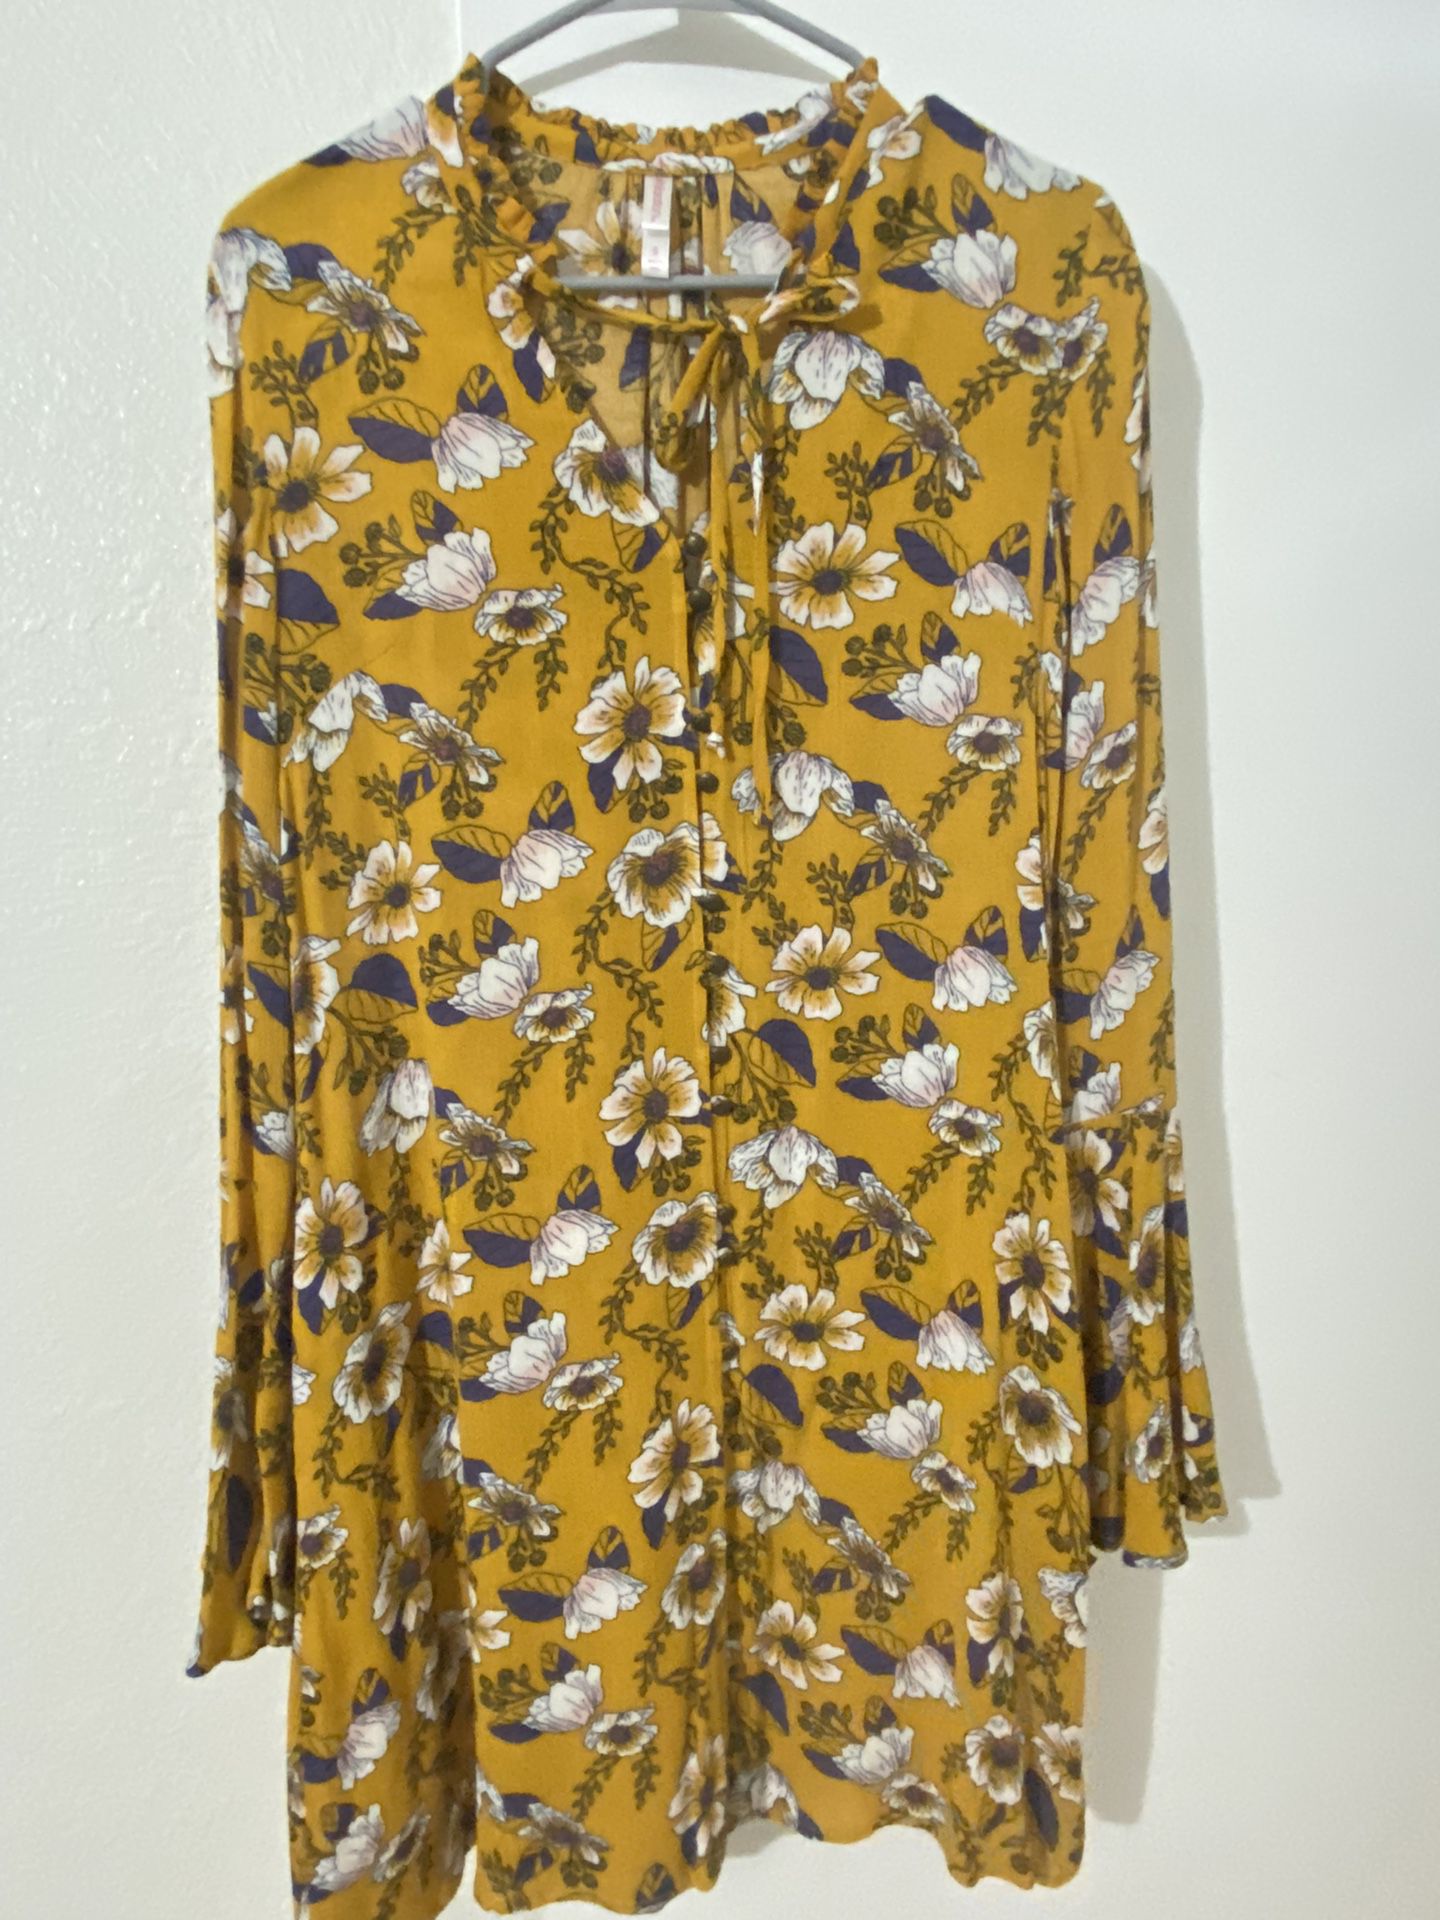 Dress Size Small New (Target Brand) $10